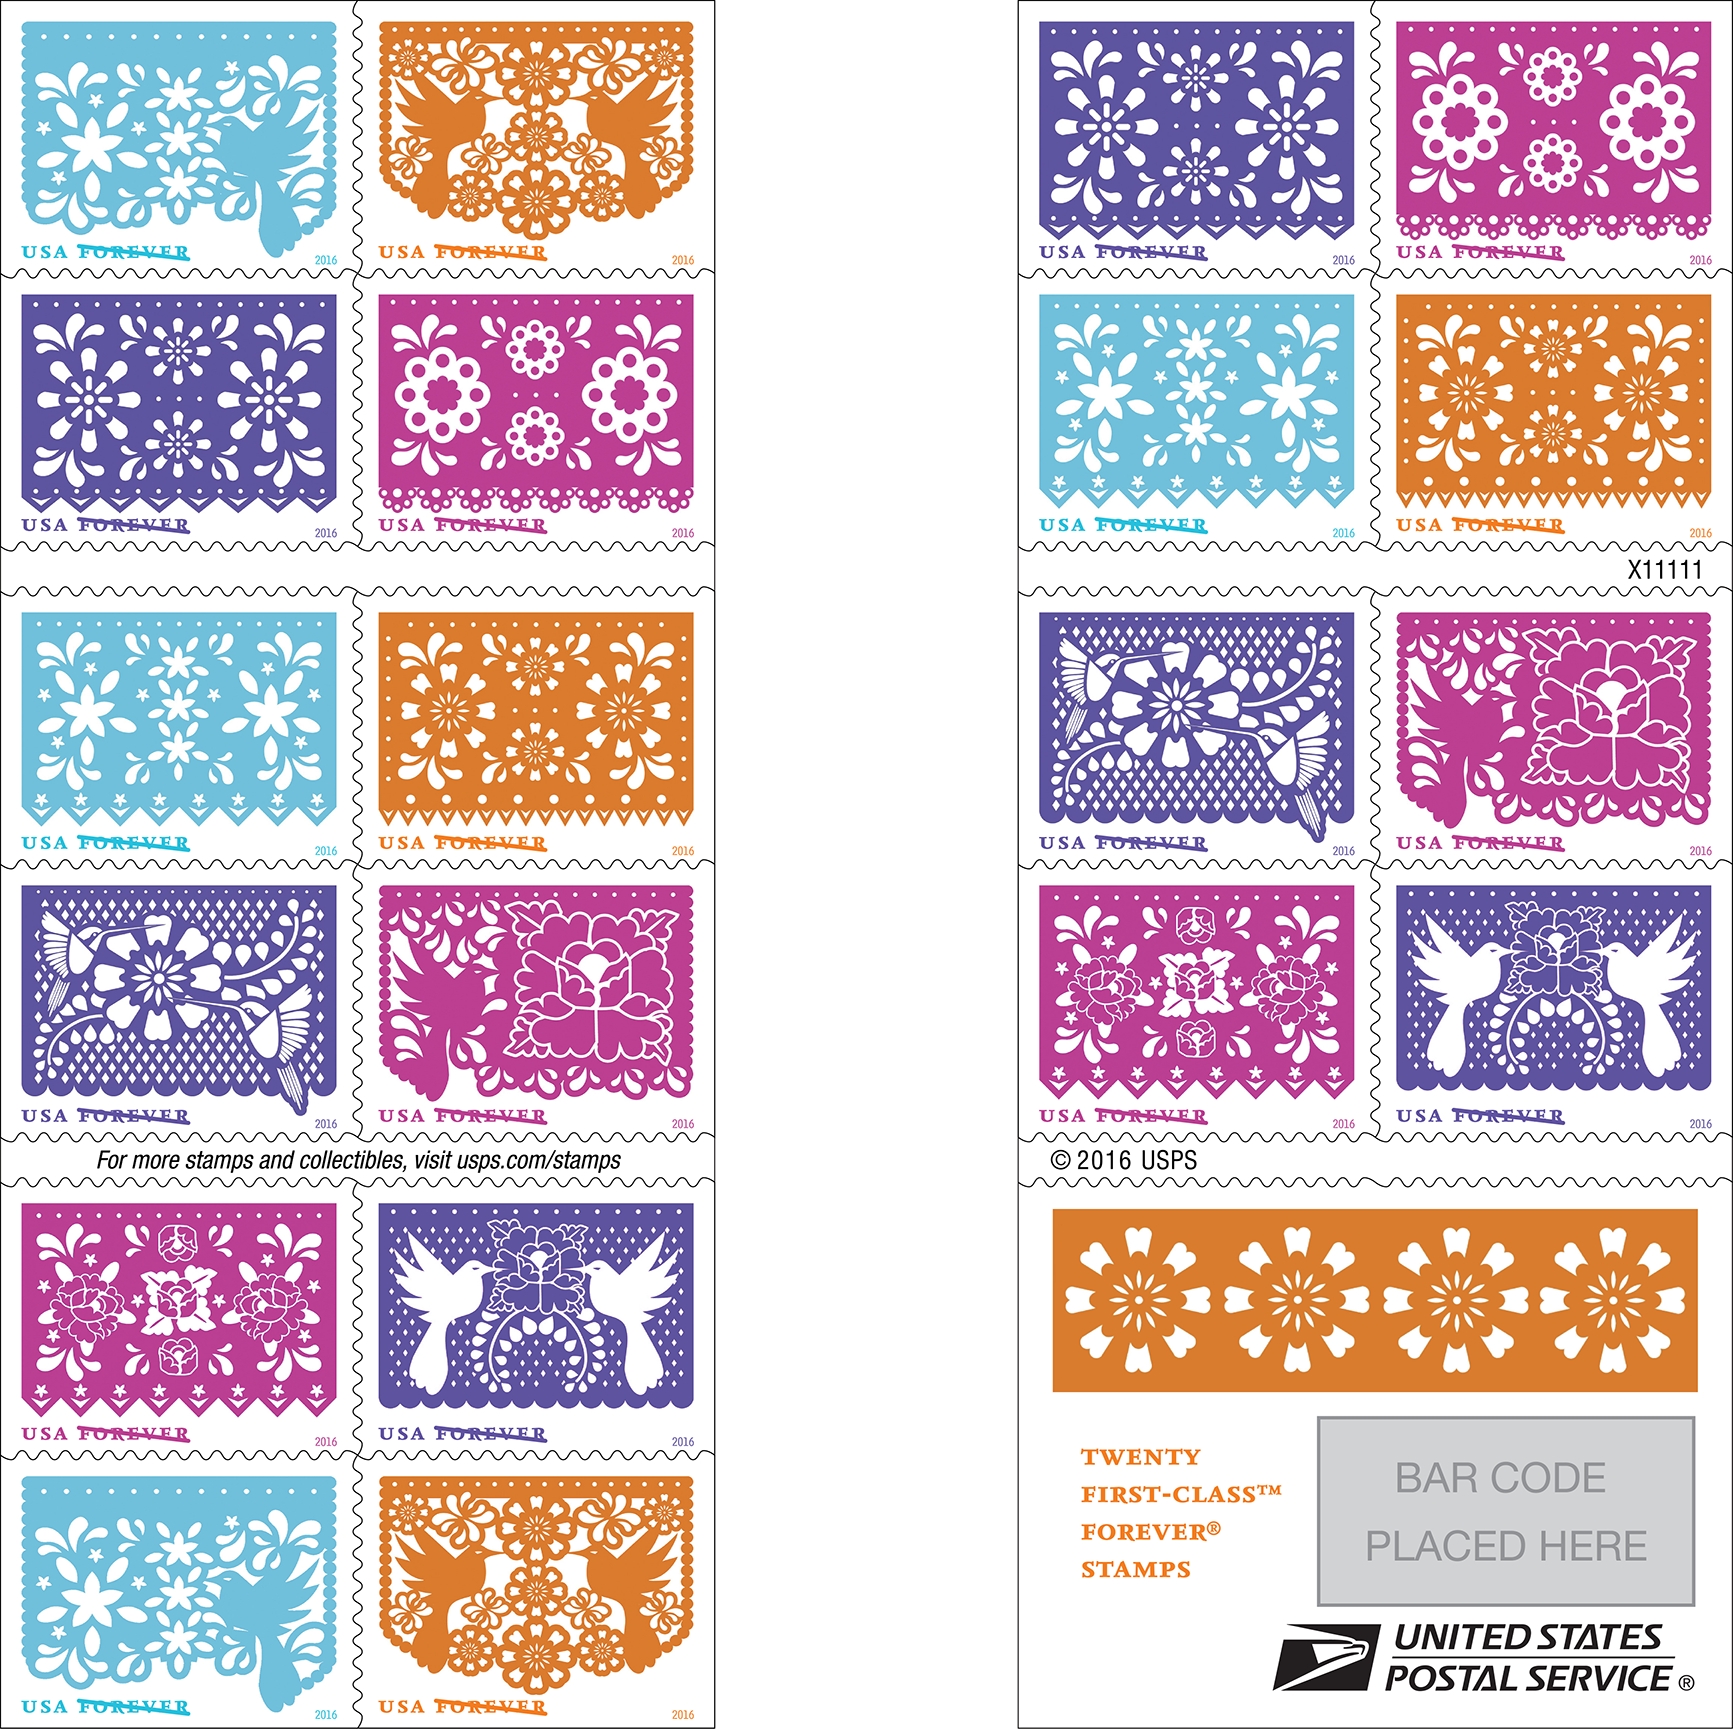 New Forever Stamps Booklet features colorful celebrations